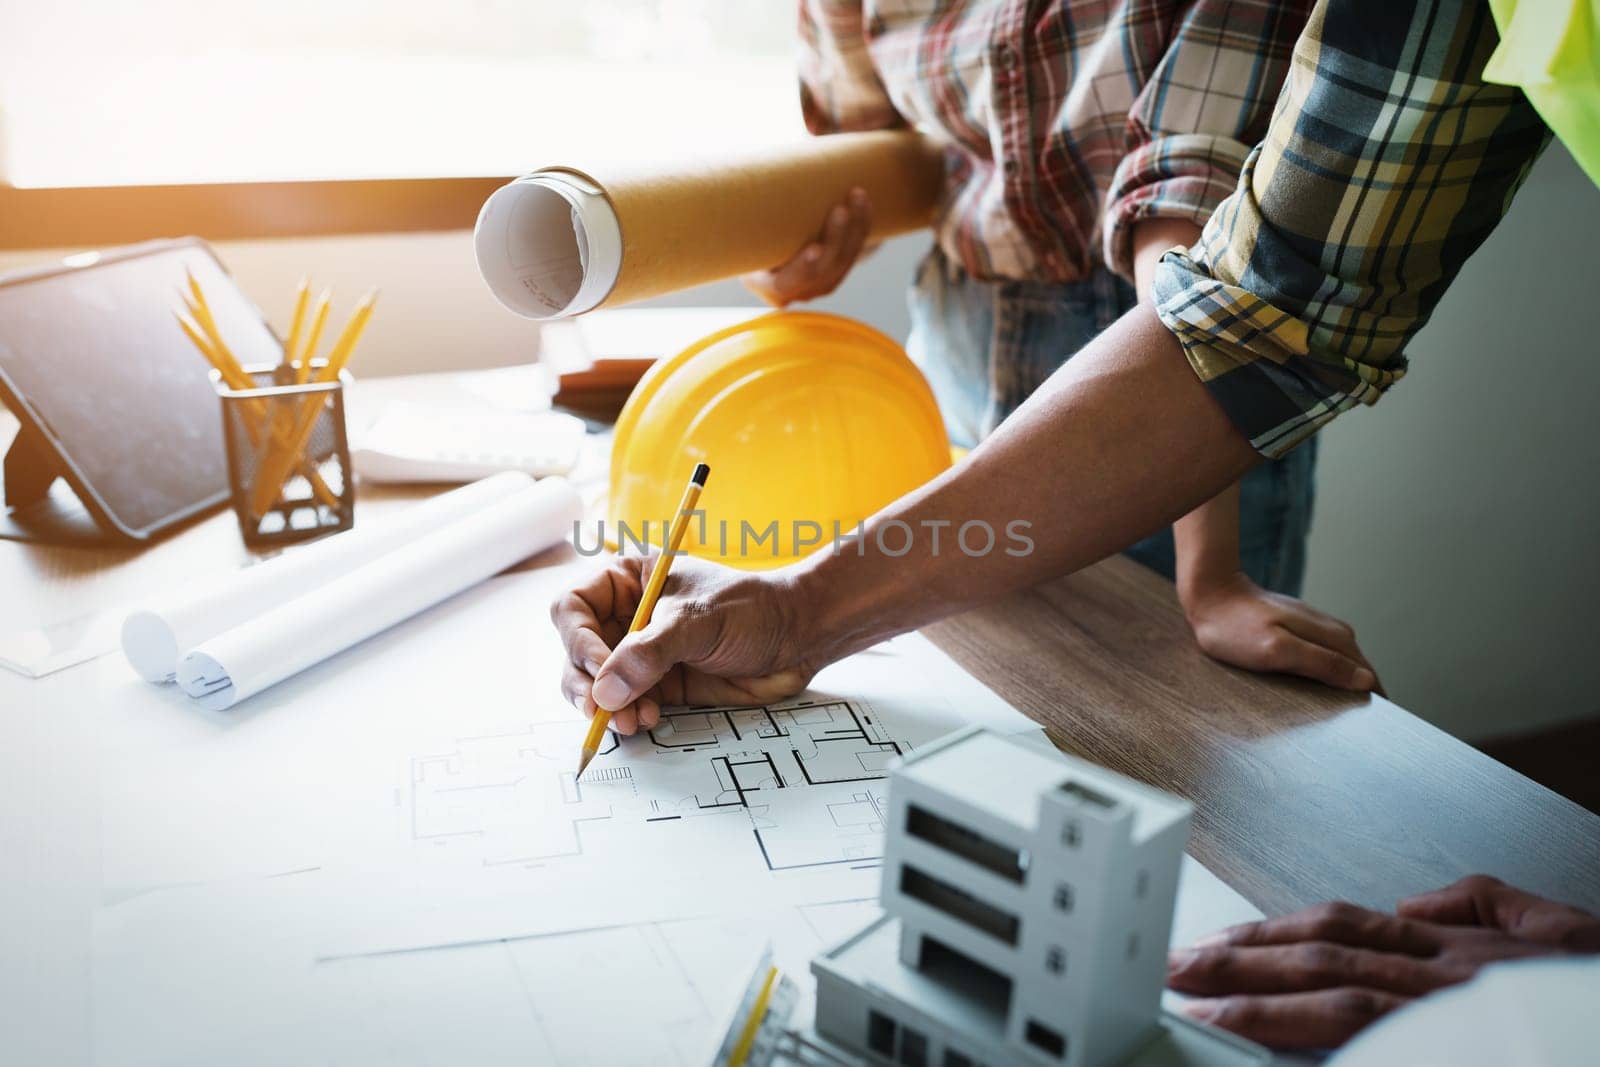 Engineers are consulting the team to design an architectural structure for clients with blueprints and building models to work at office by Manastrong